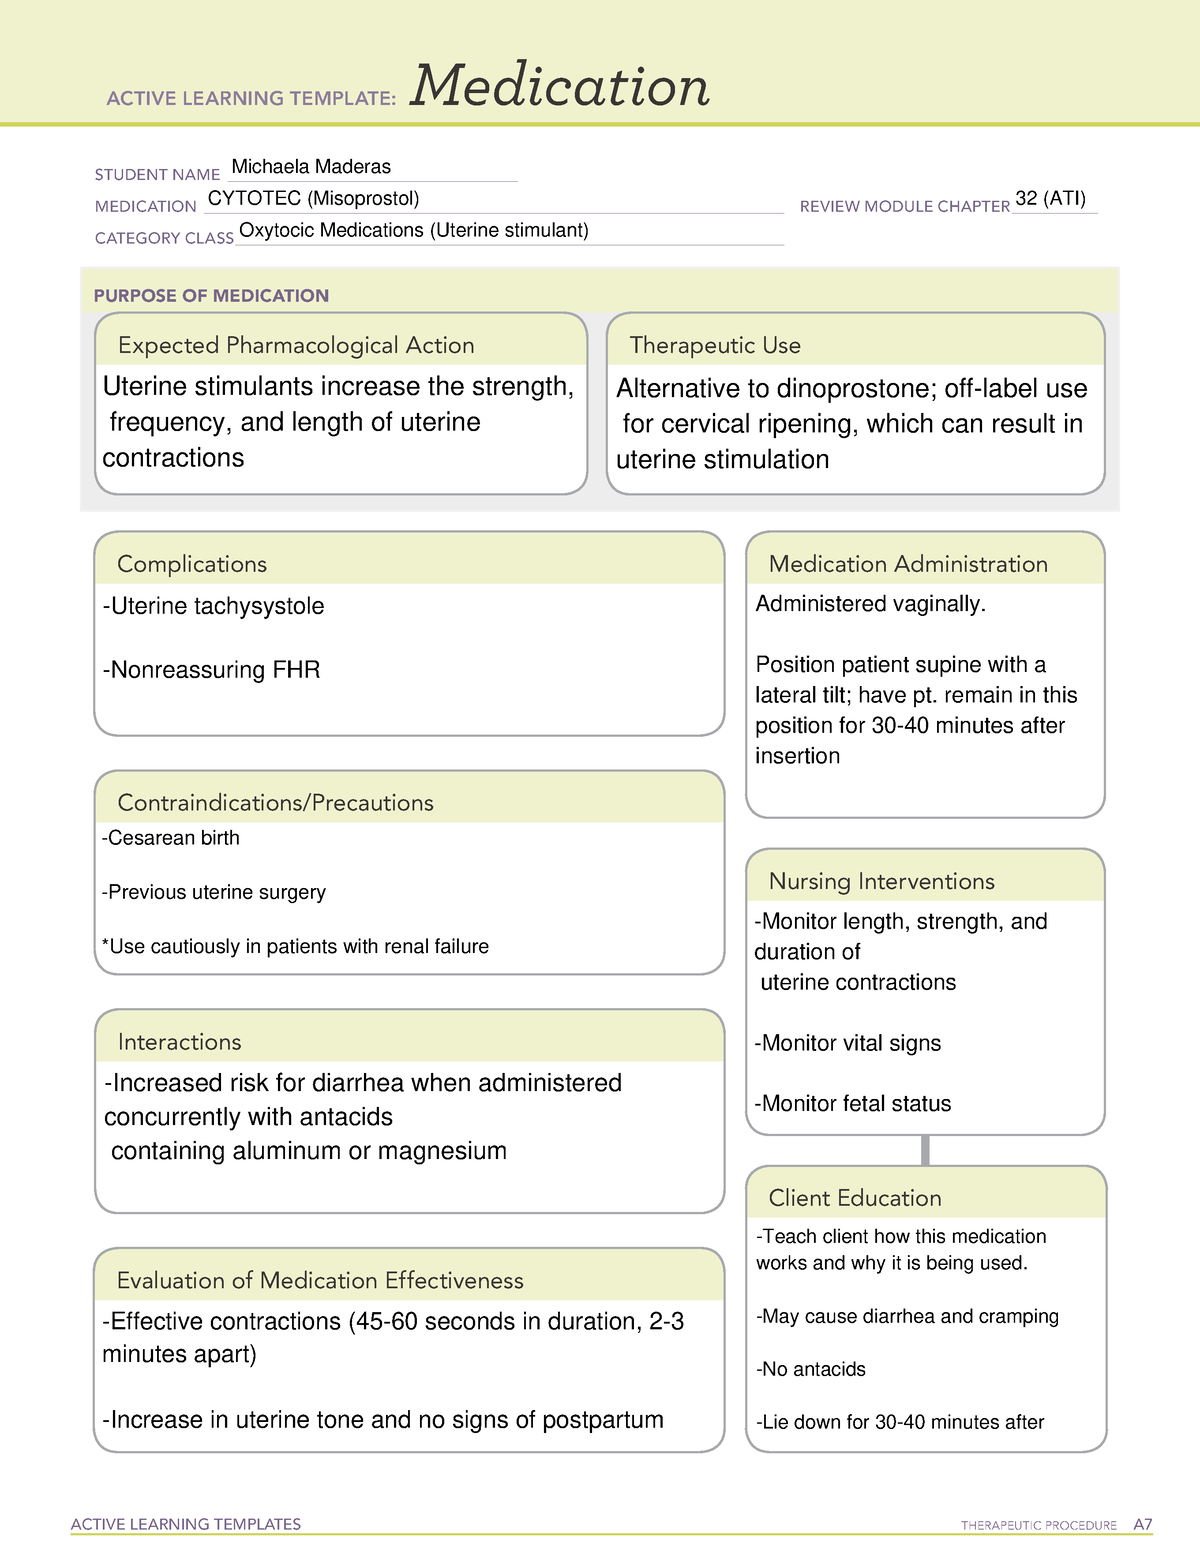 Cytotec Oxytotic Medications ATI template ACTIVE LEARNING TEMPLATES